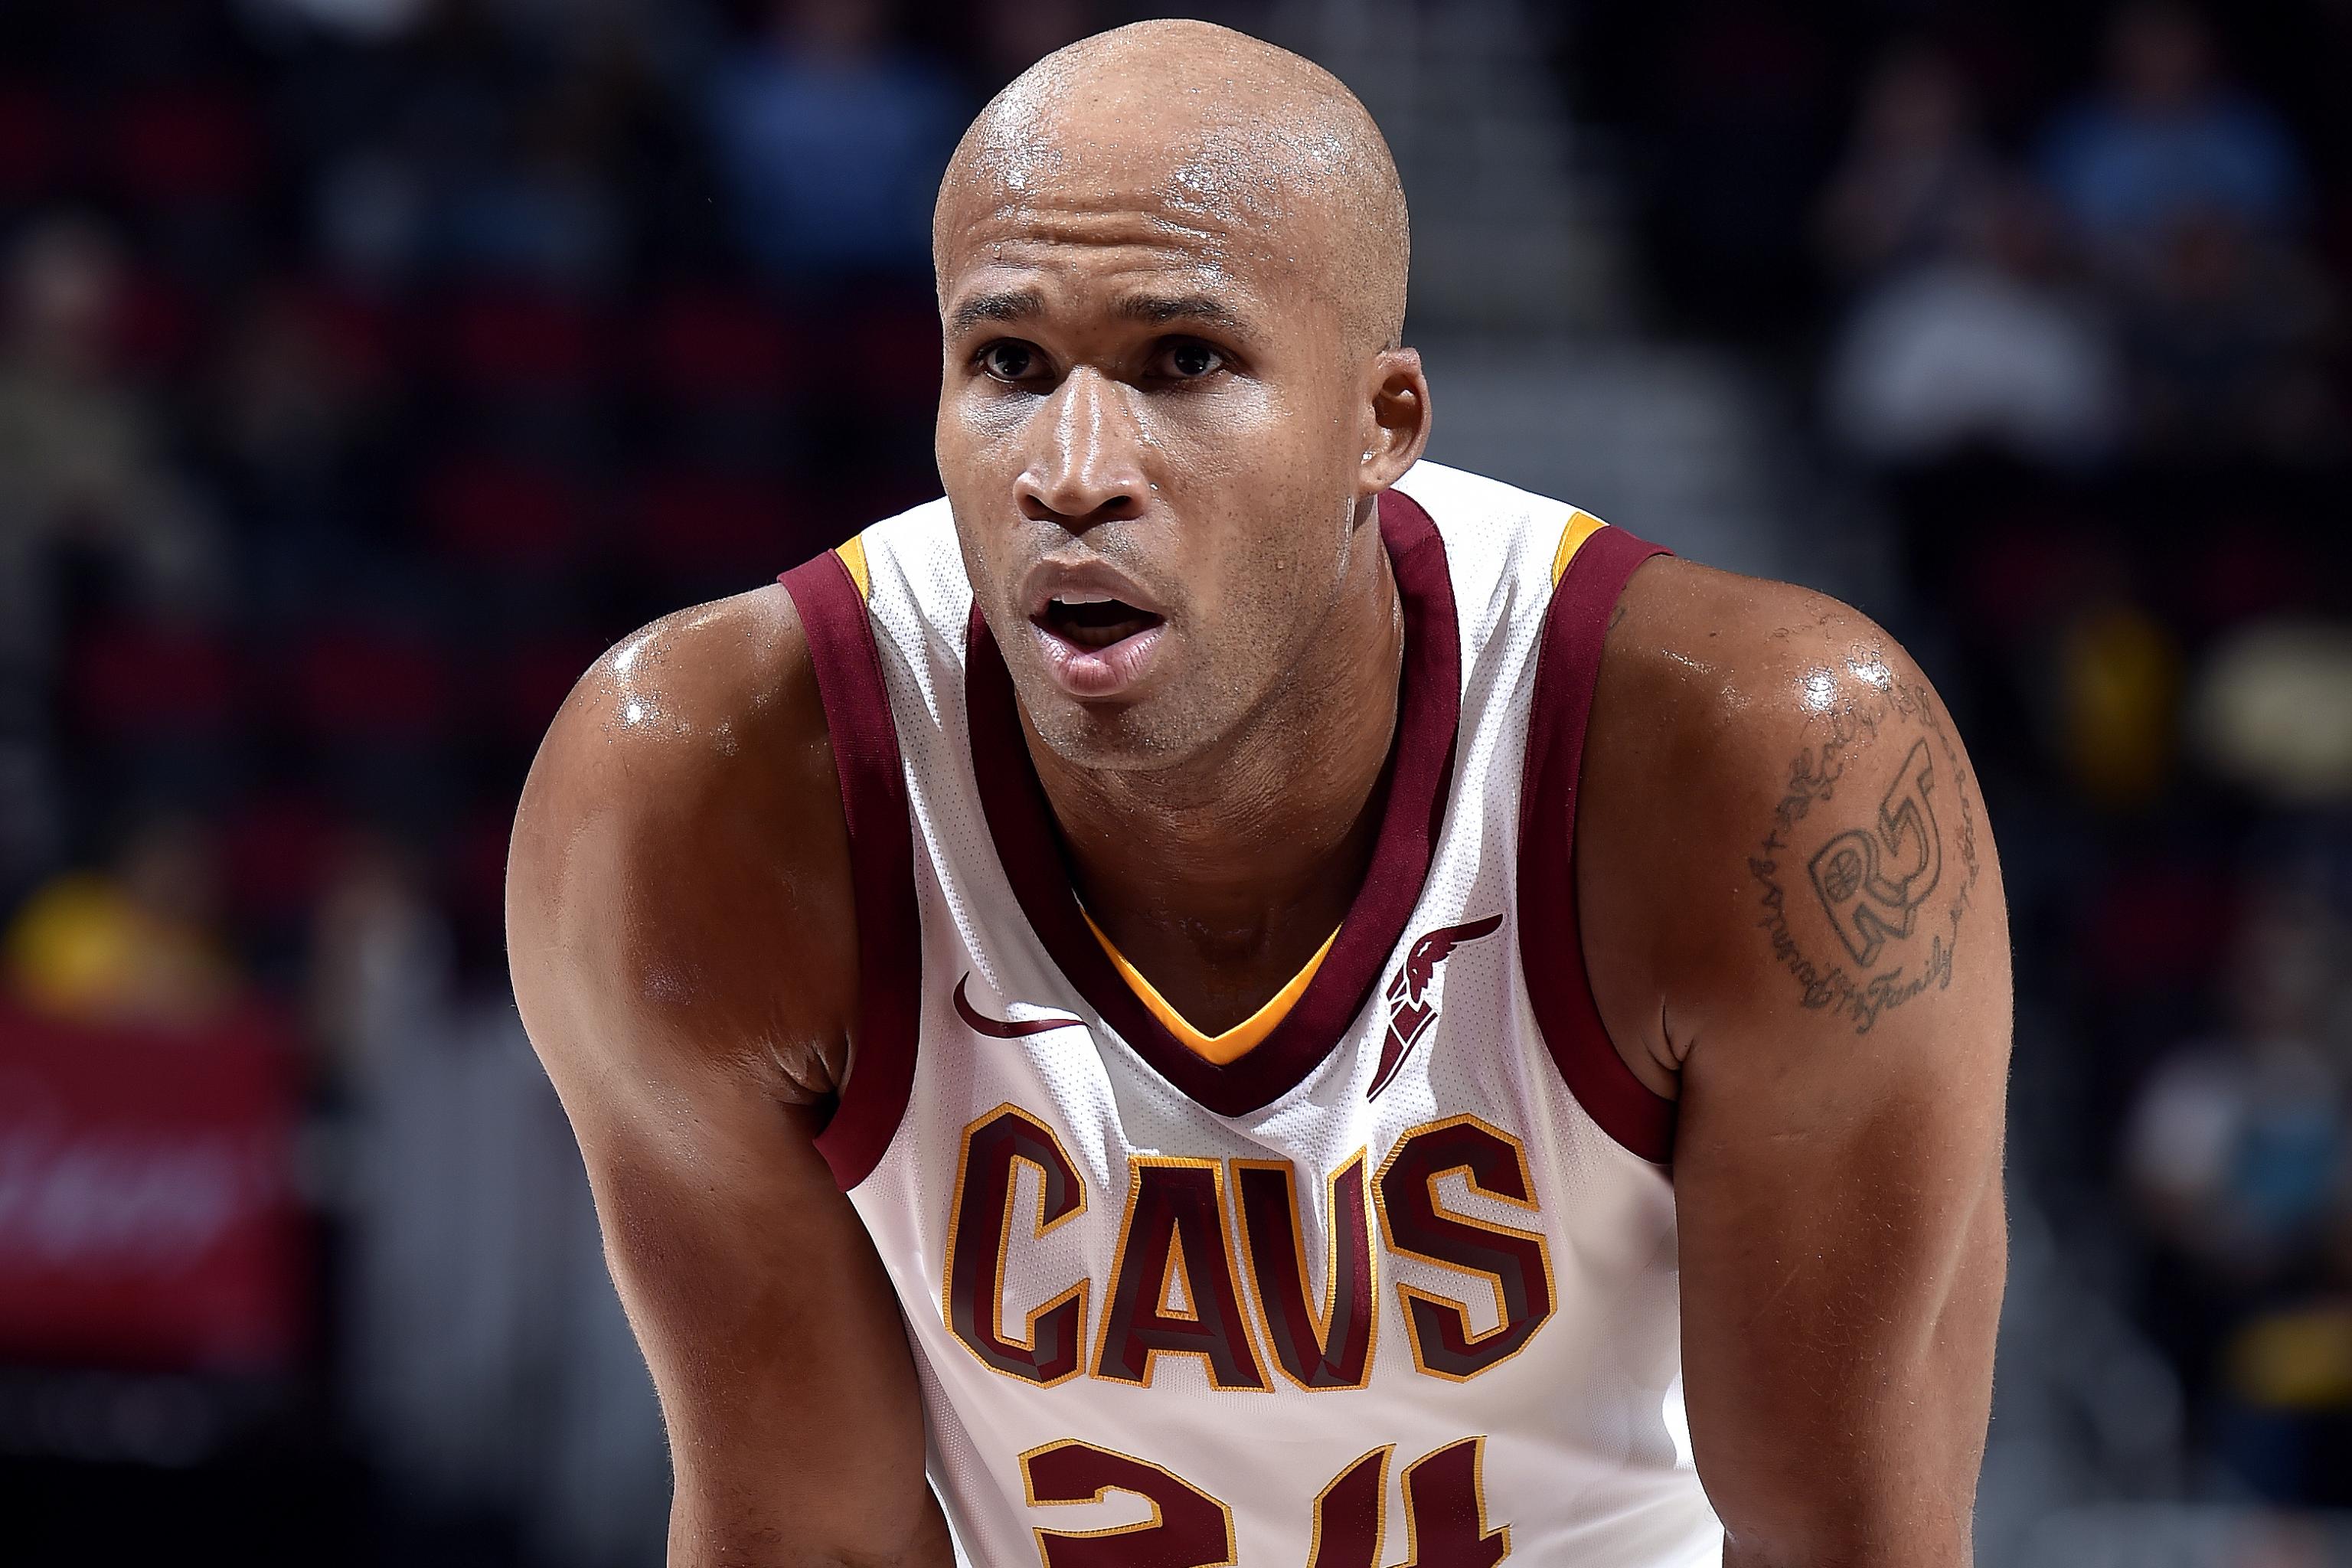 Richard Jefferson aims to “pay it forward” with young Denver Nuggets after  signing 1-year contract – The Denver Post